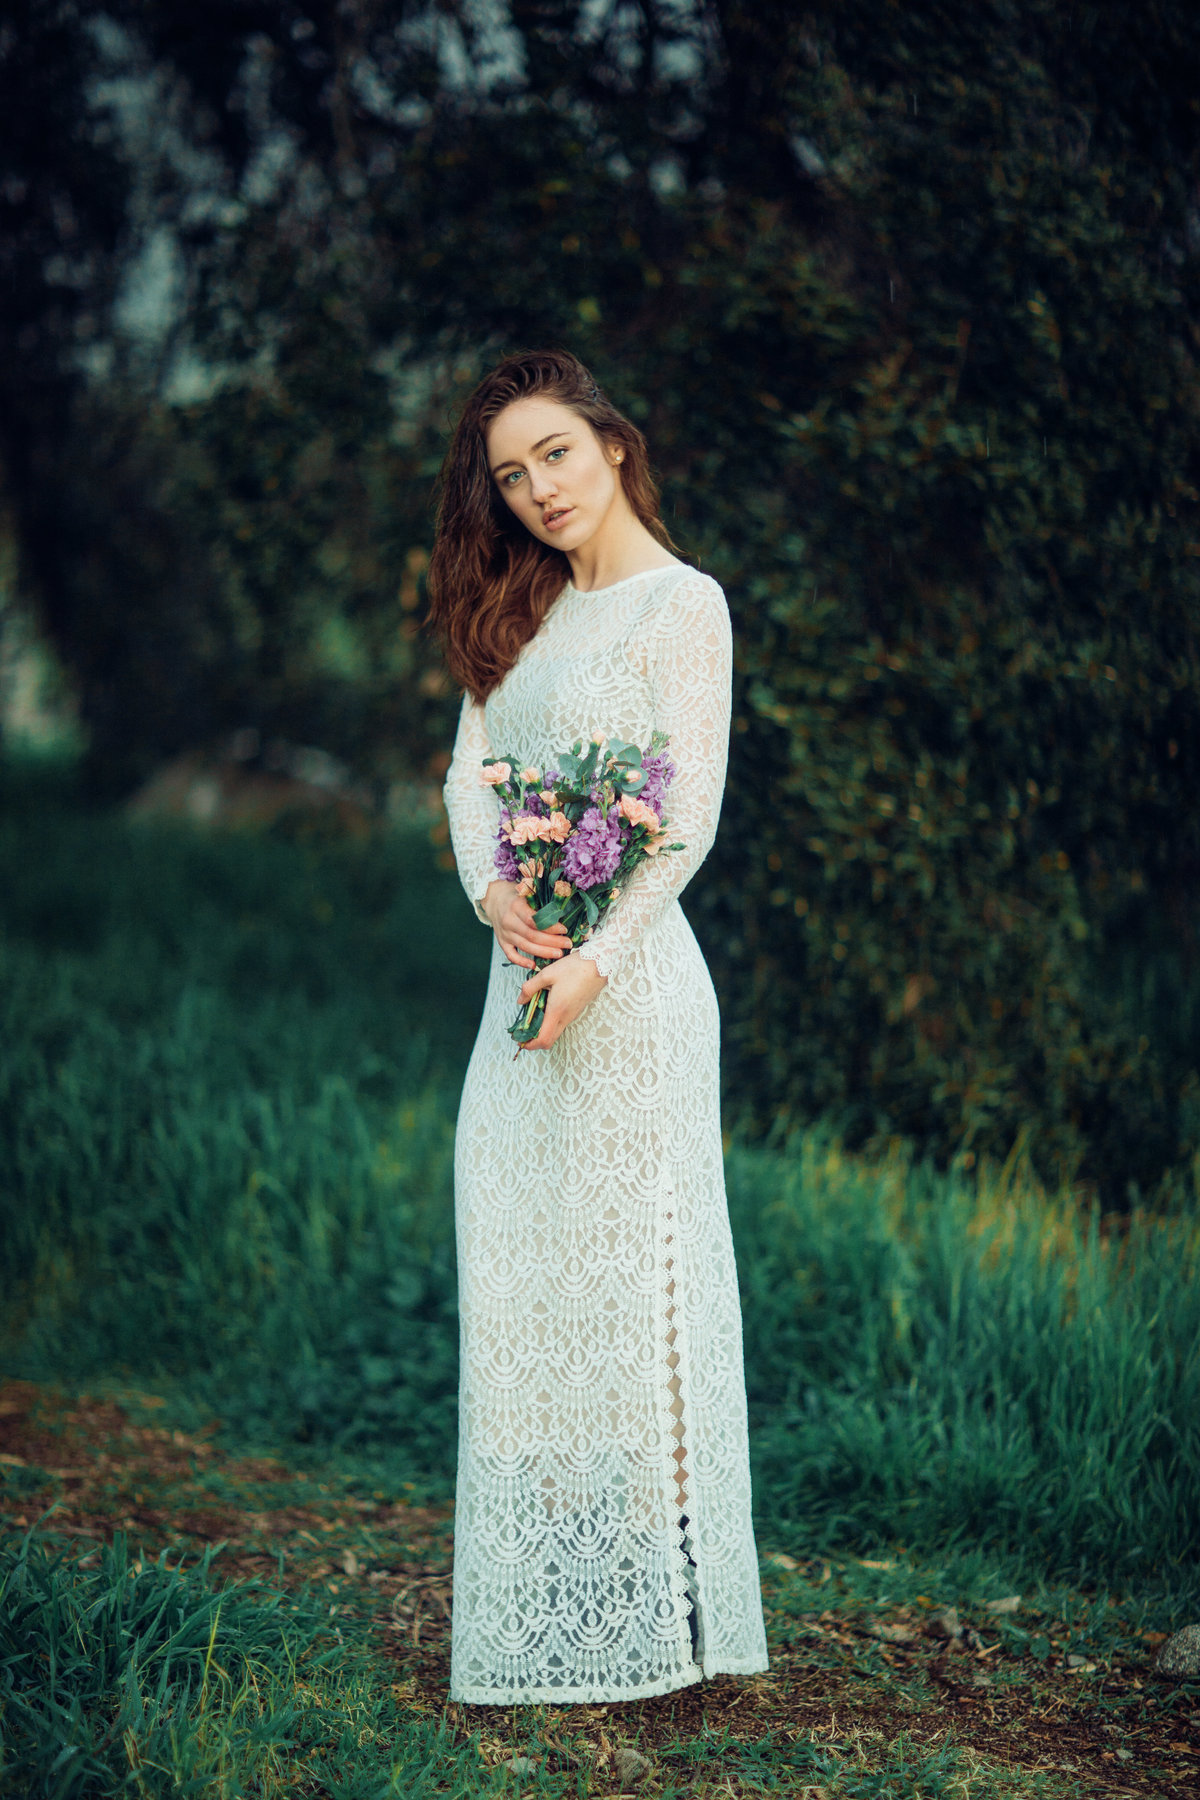 Portrait Photo Of Young Woman In White Dress Holding Flowers Los Angeles